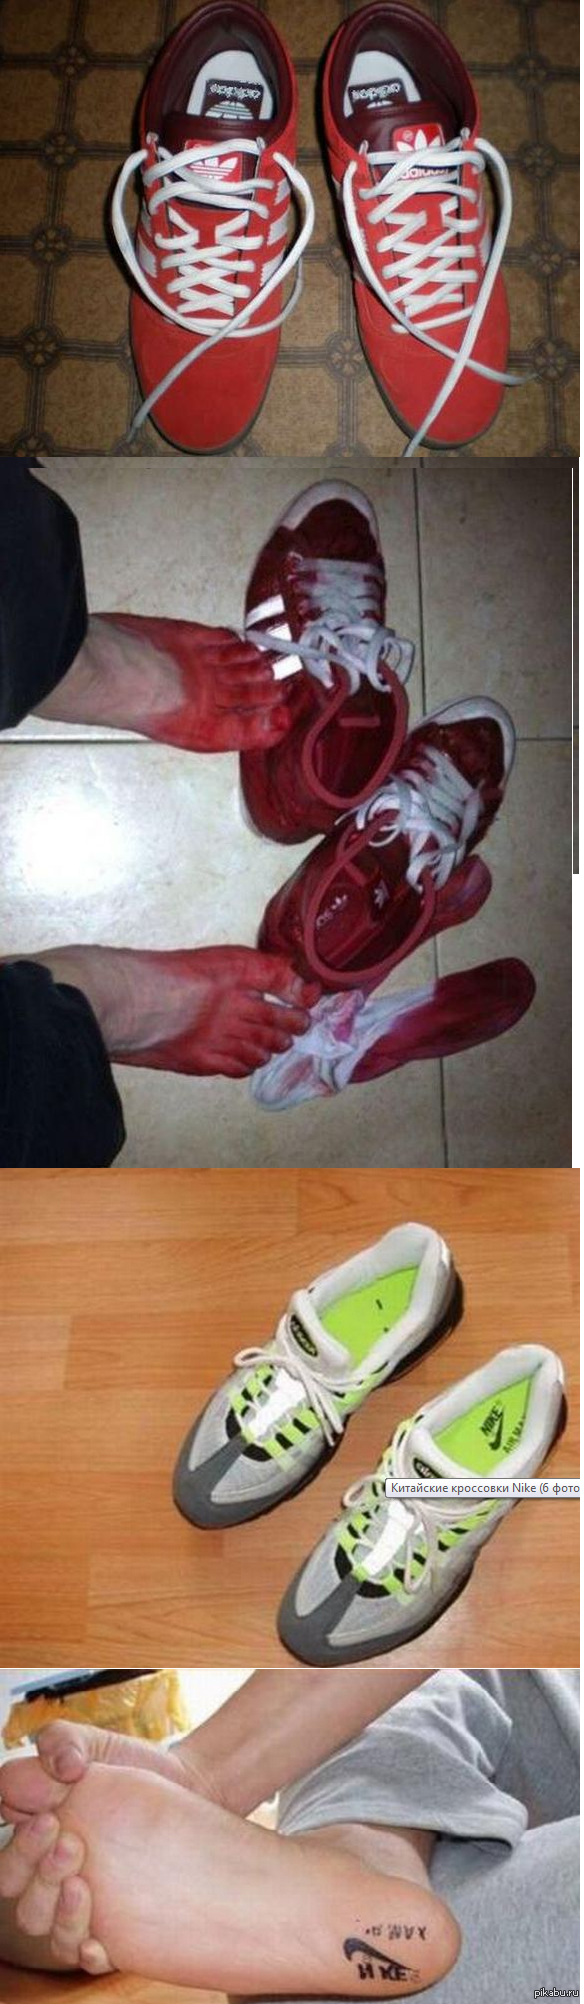 spioneril:3 Chinese sneakers are so Chinese! - China, What's happening?, Humor, Stop